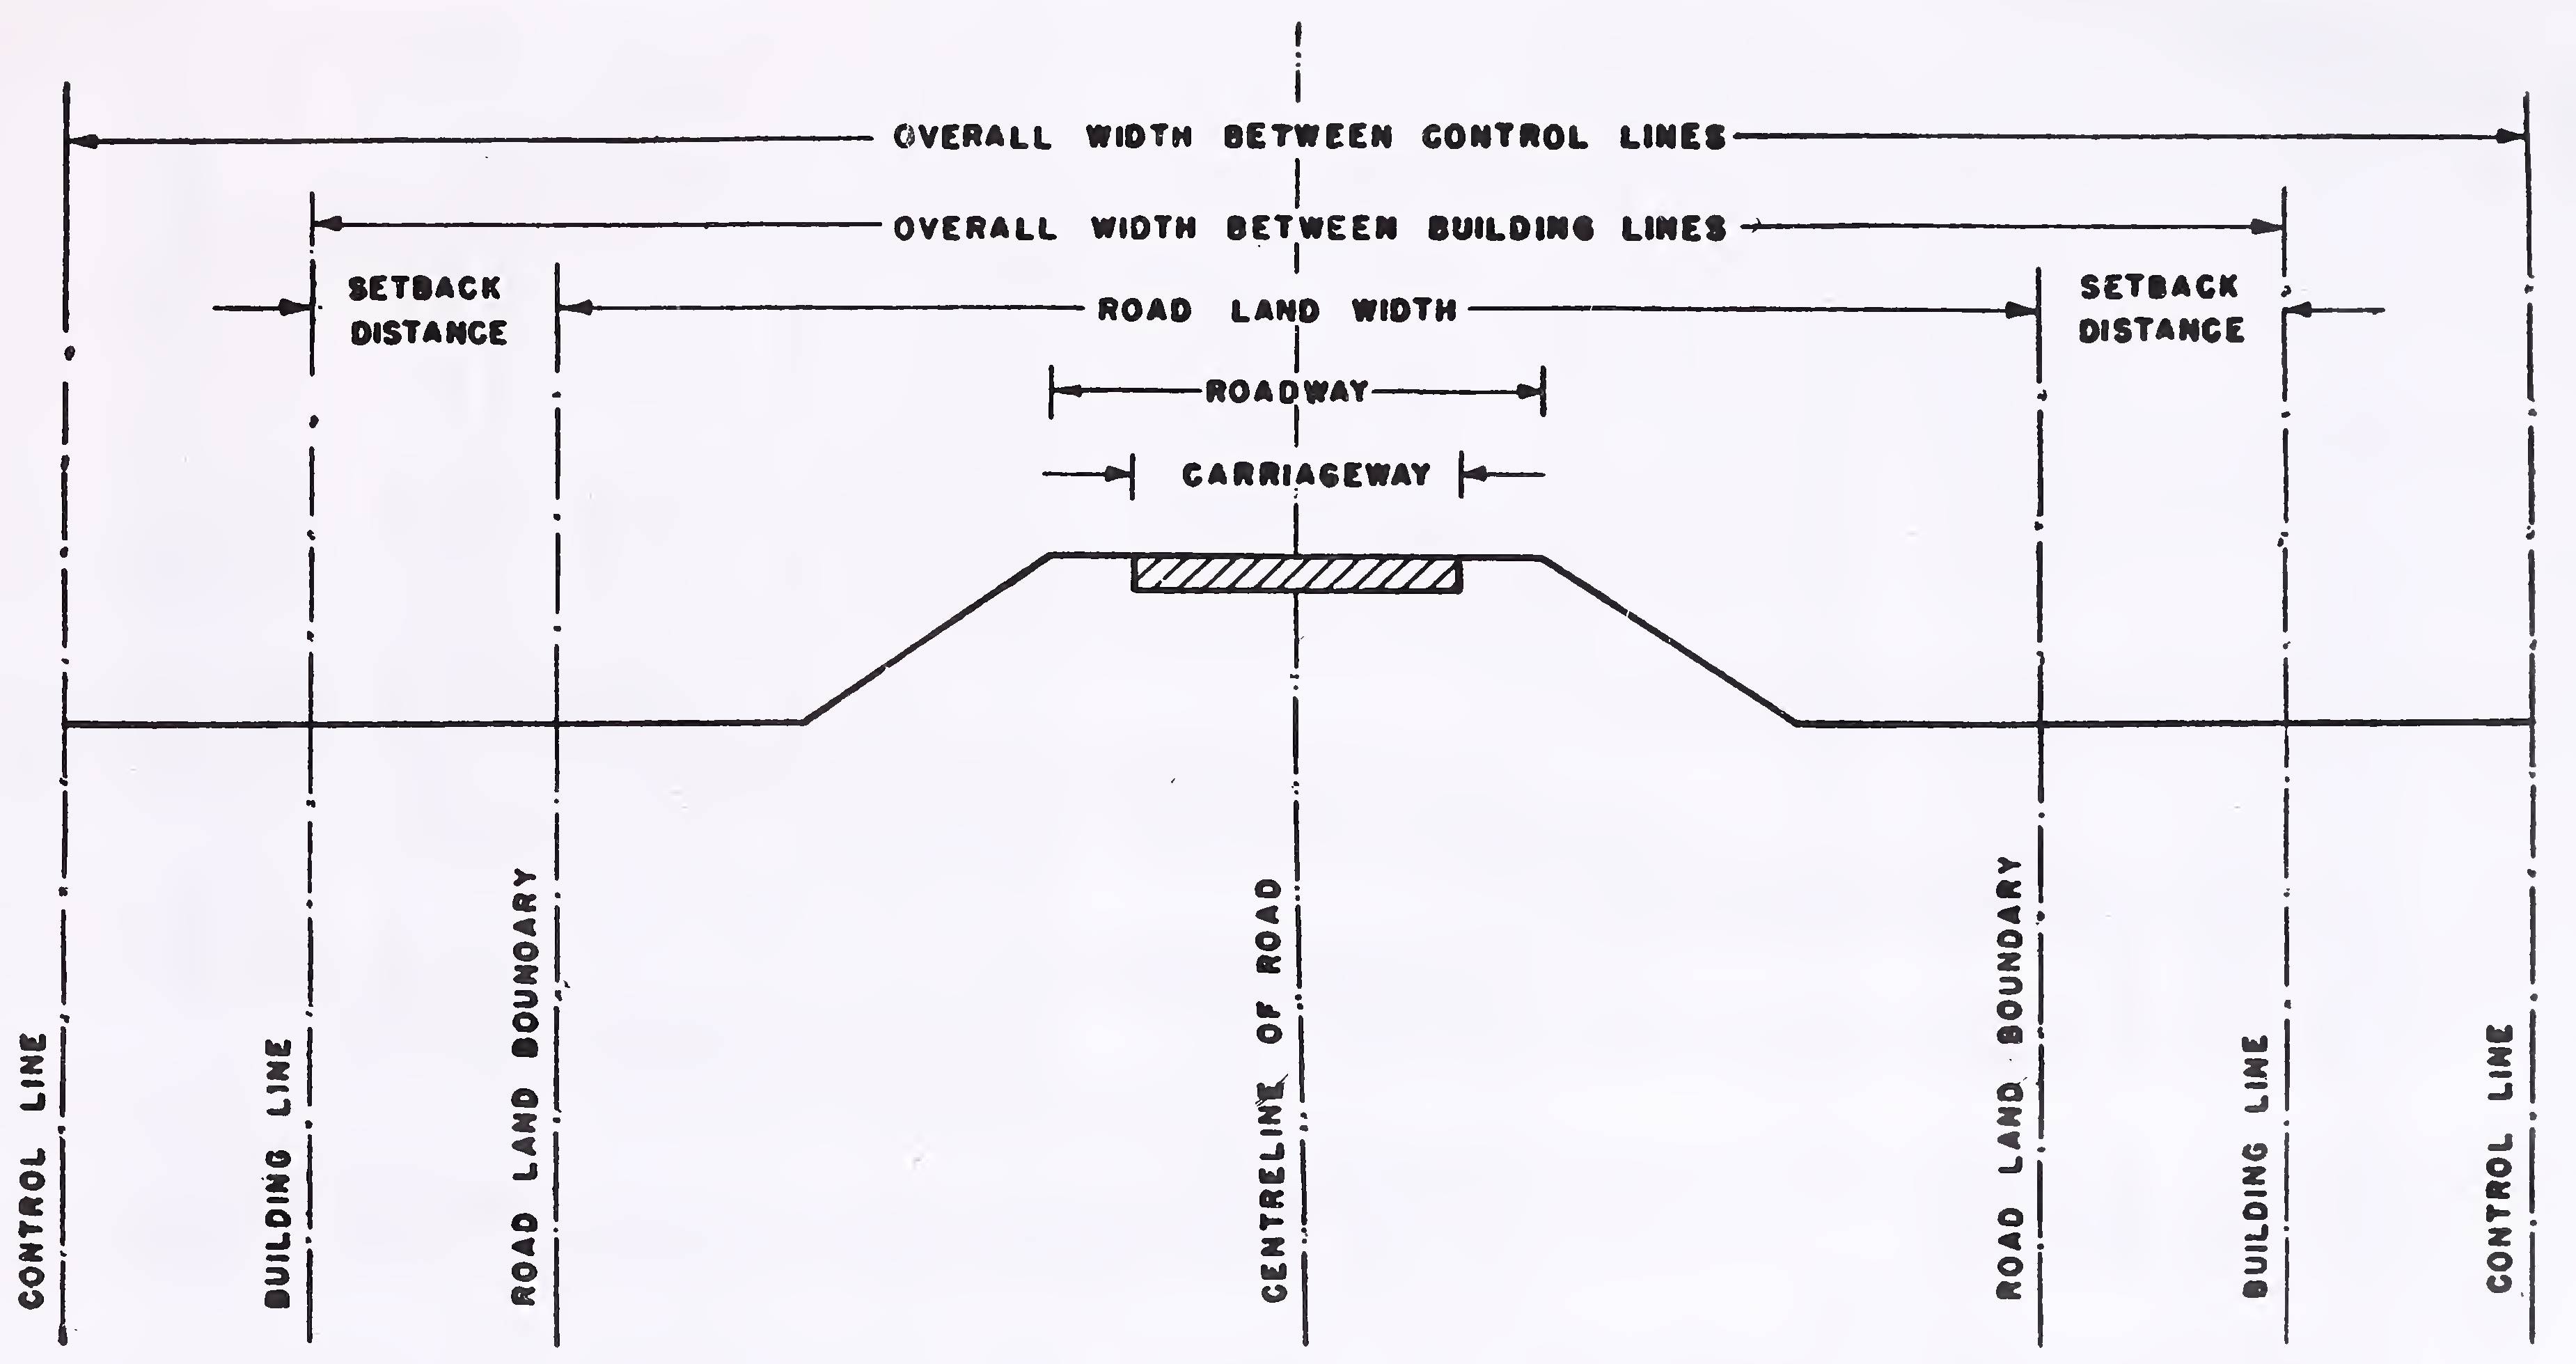 Fig. 1. Road land boundary, building lines and control lines